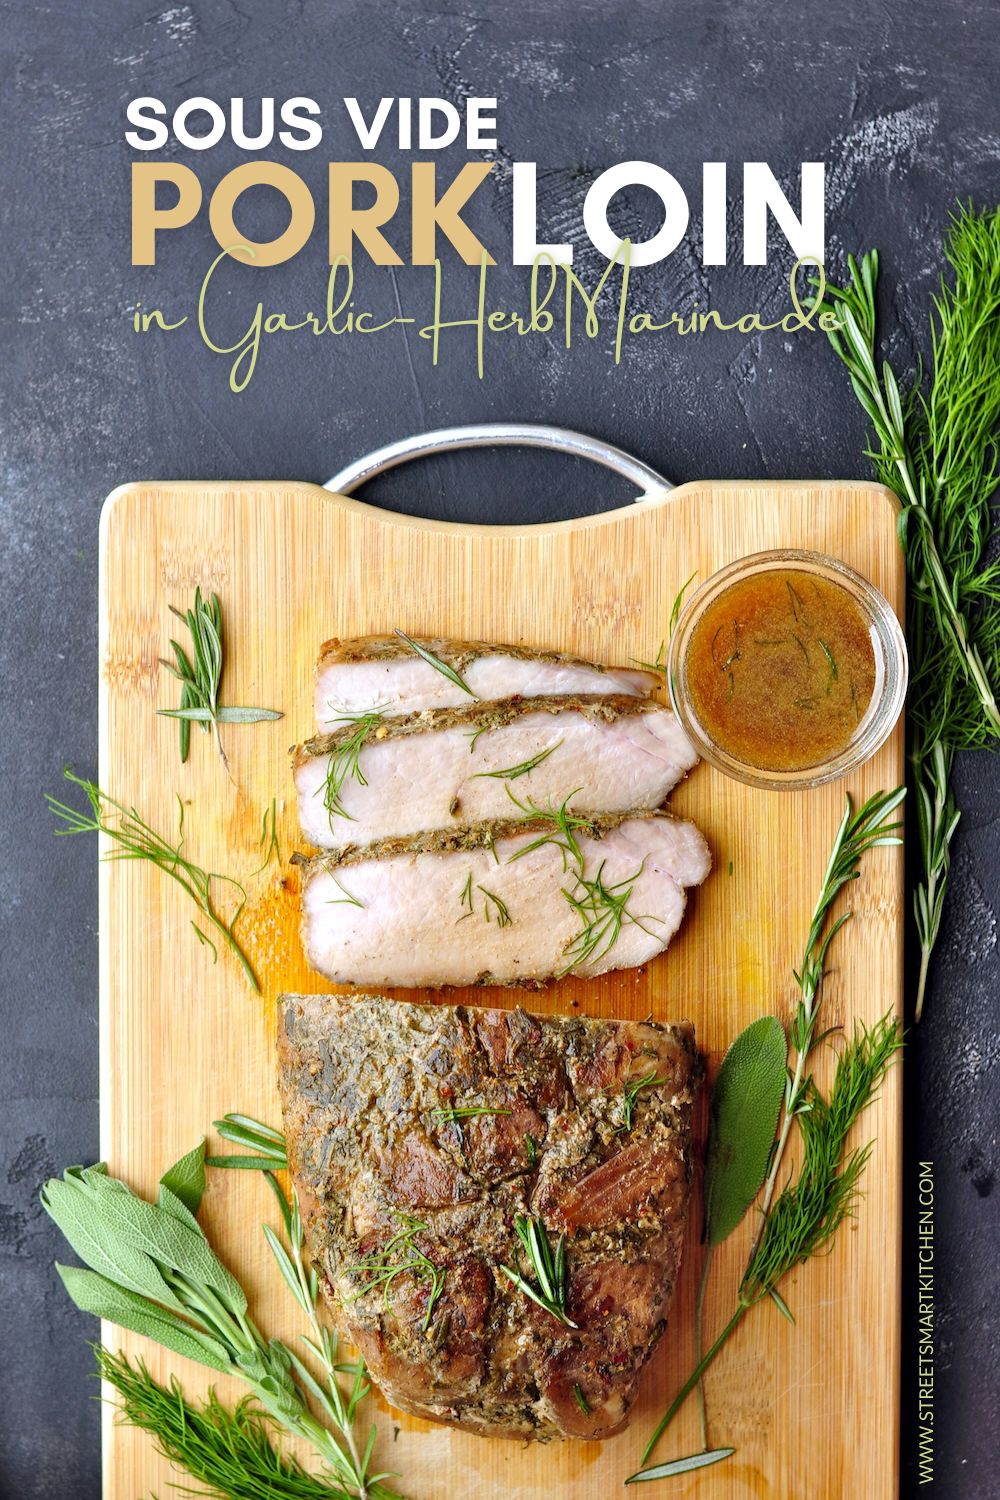 This sous vide pork loin roast in a green garlic-herb marinade is a foolproof way to easily make a restaurant-quality meal at home.